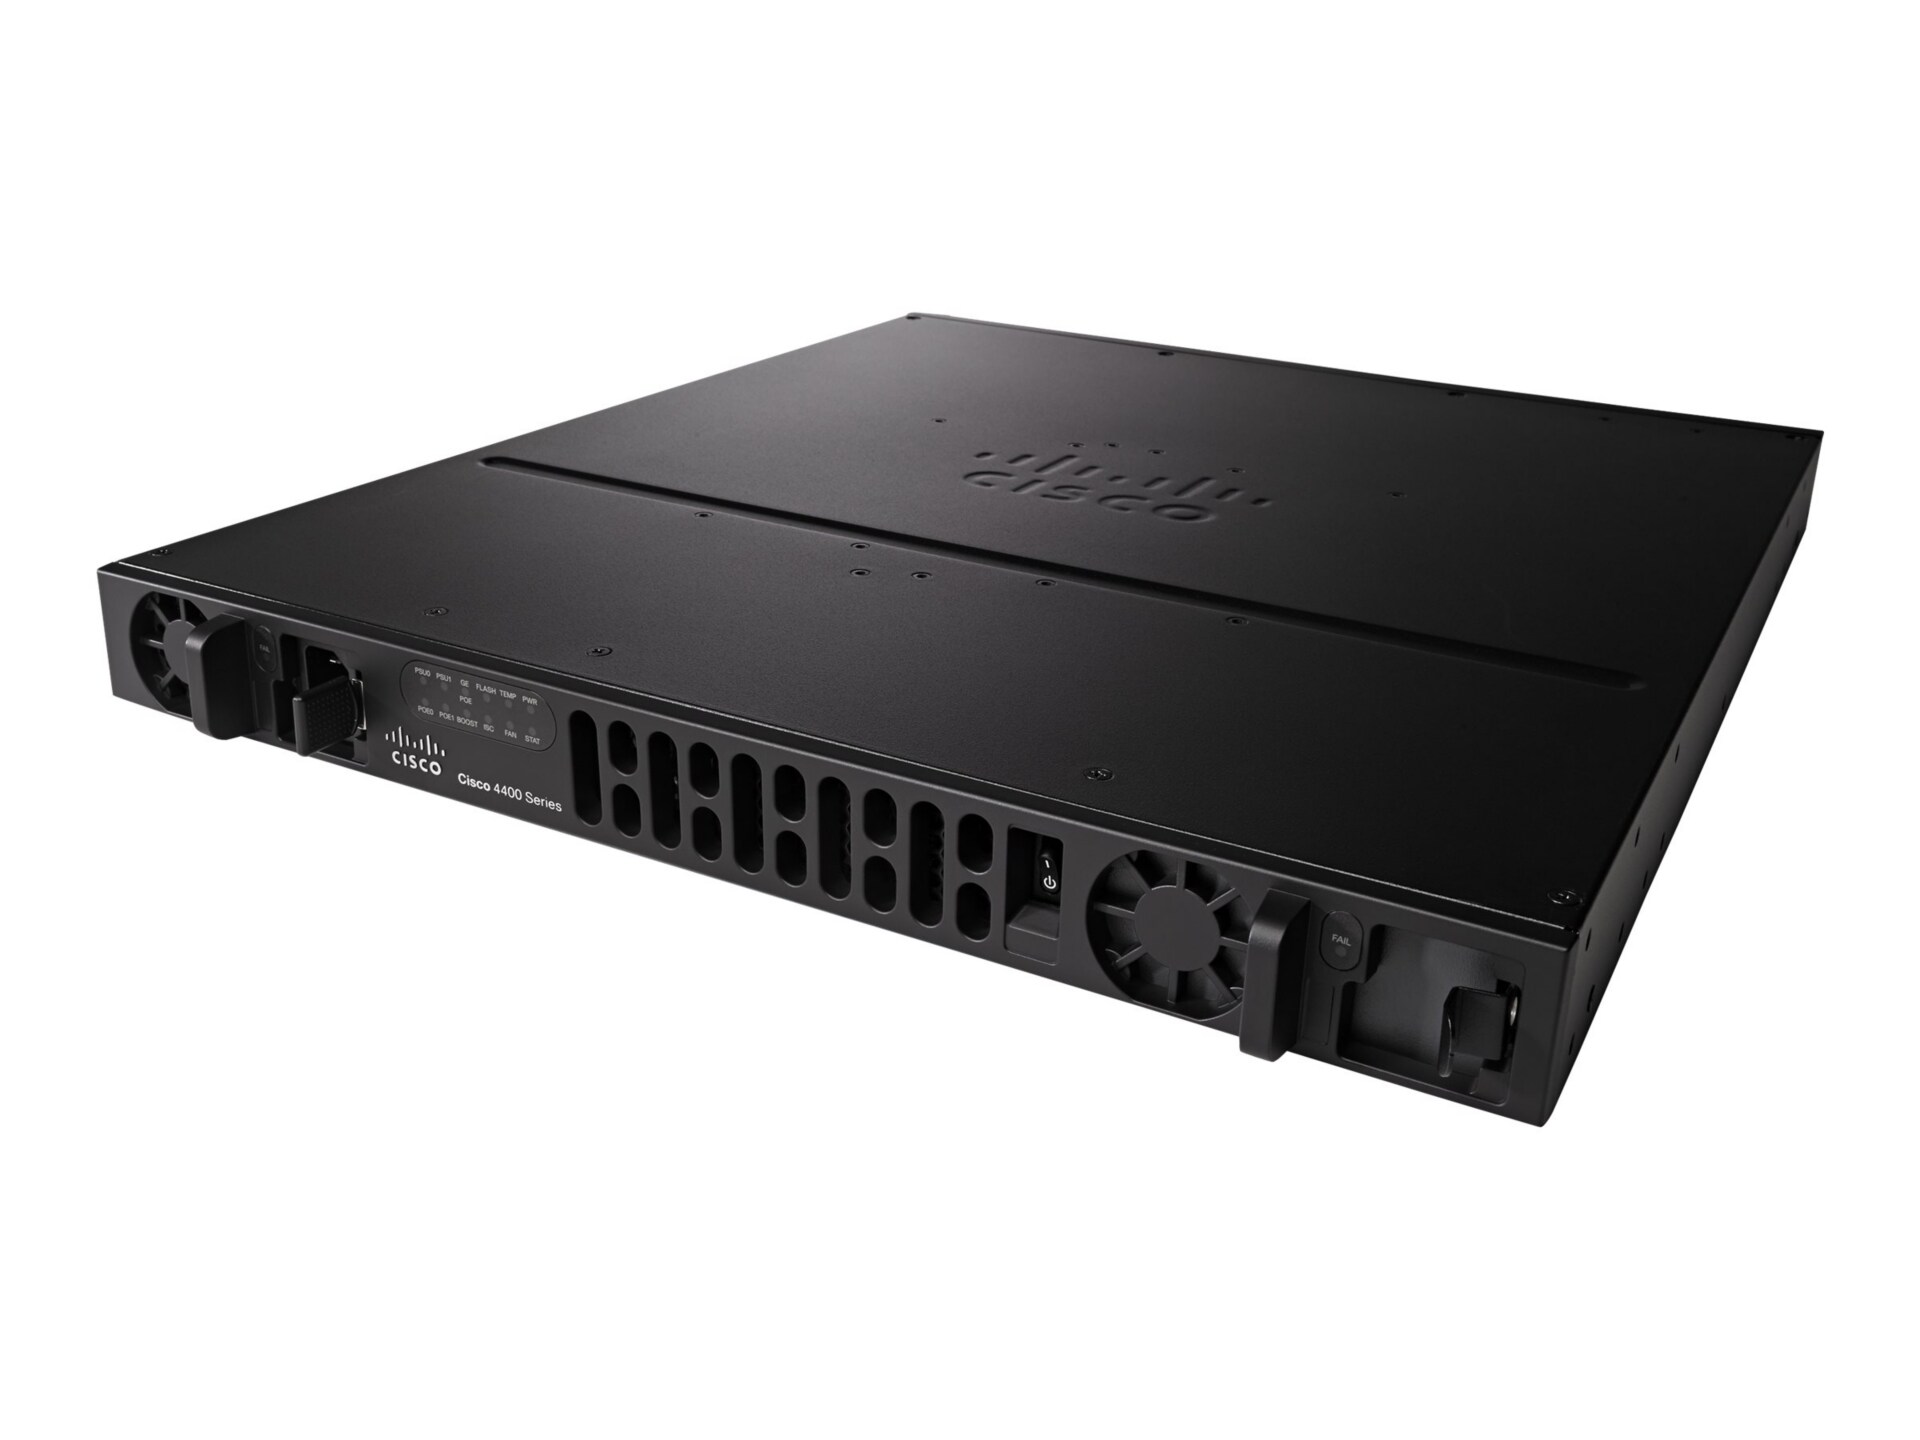 CISCO ISR 4431 WITH DNA SUB